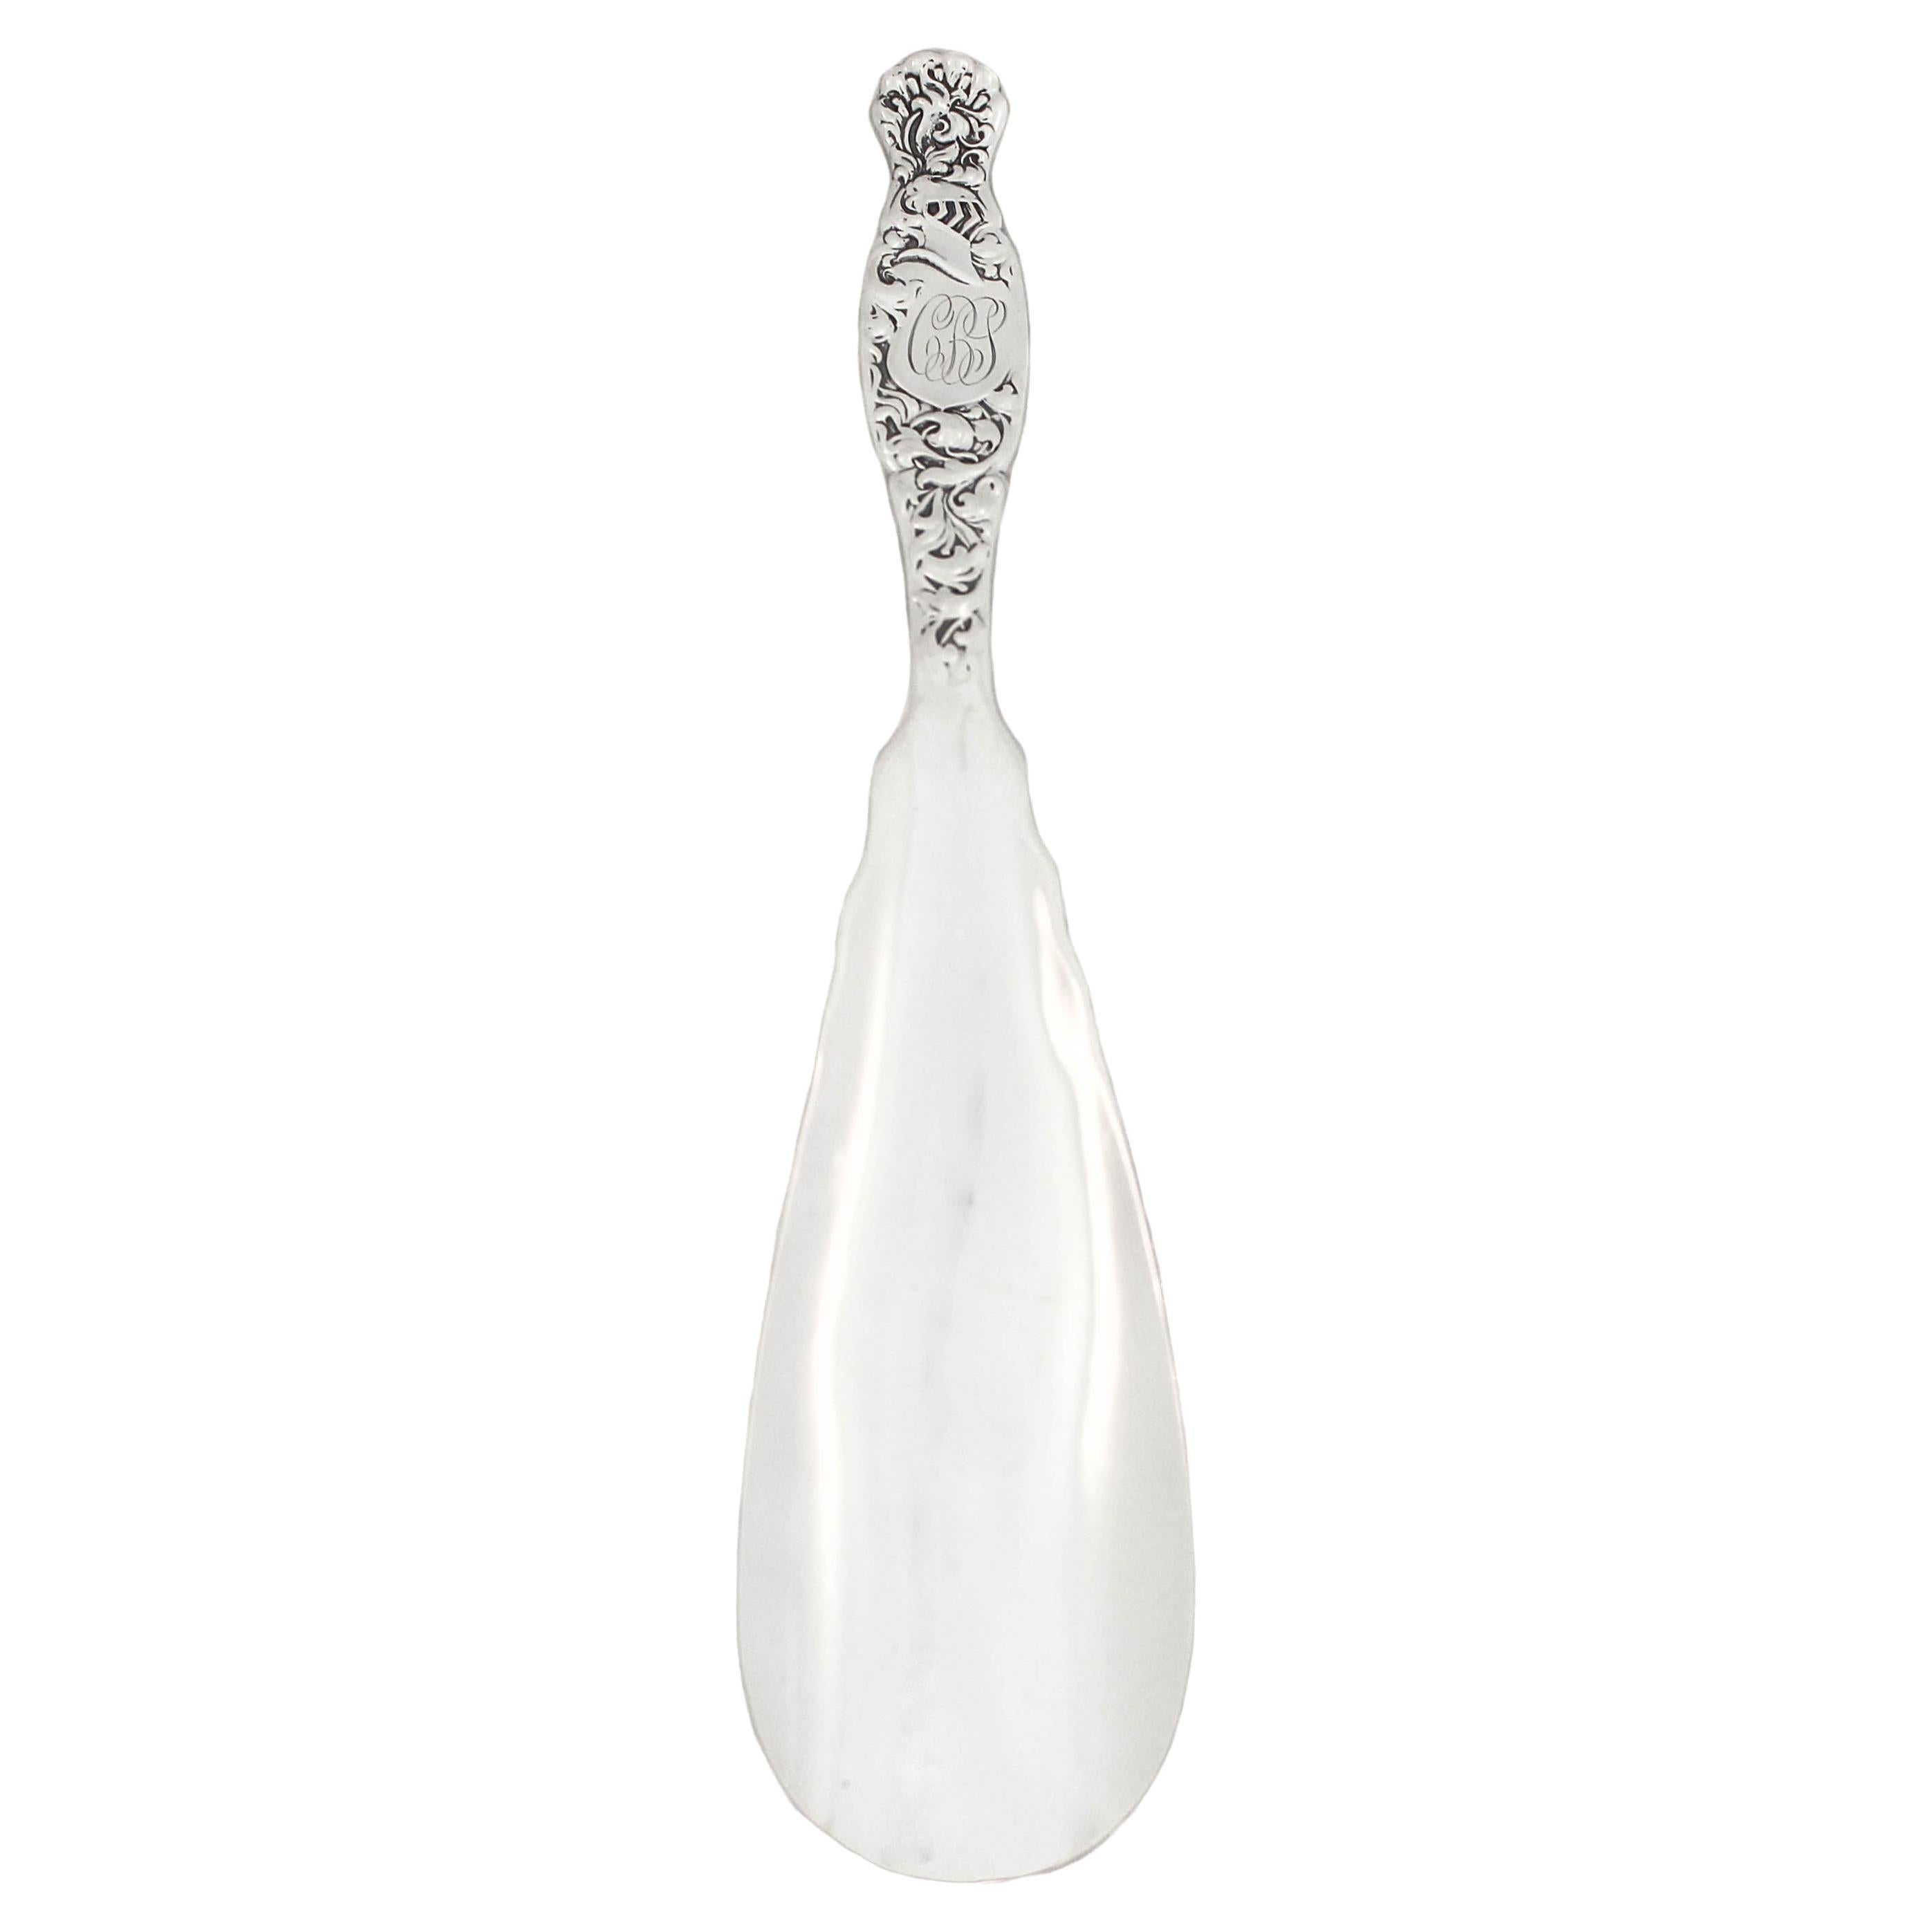 Sterling Silver “Heraldic” Shoehorn For Sale